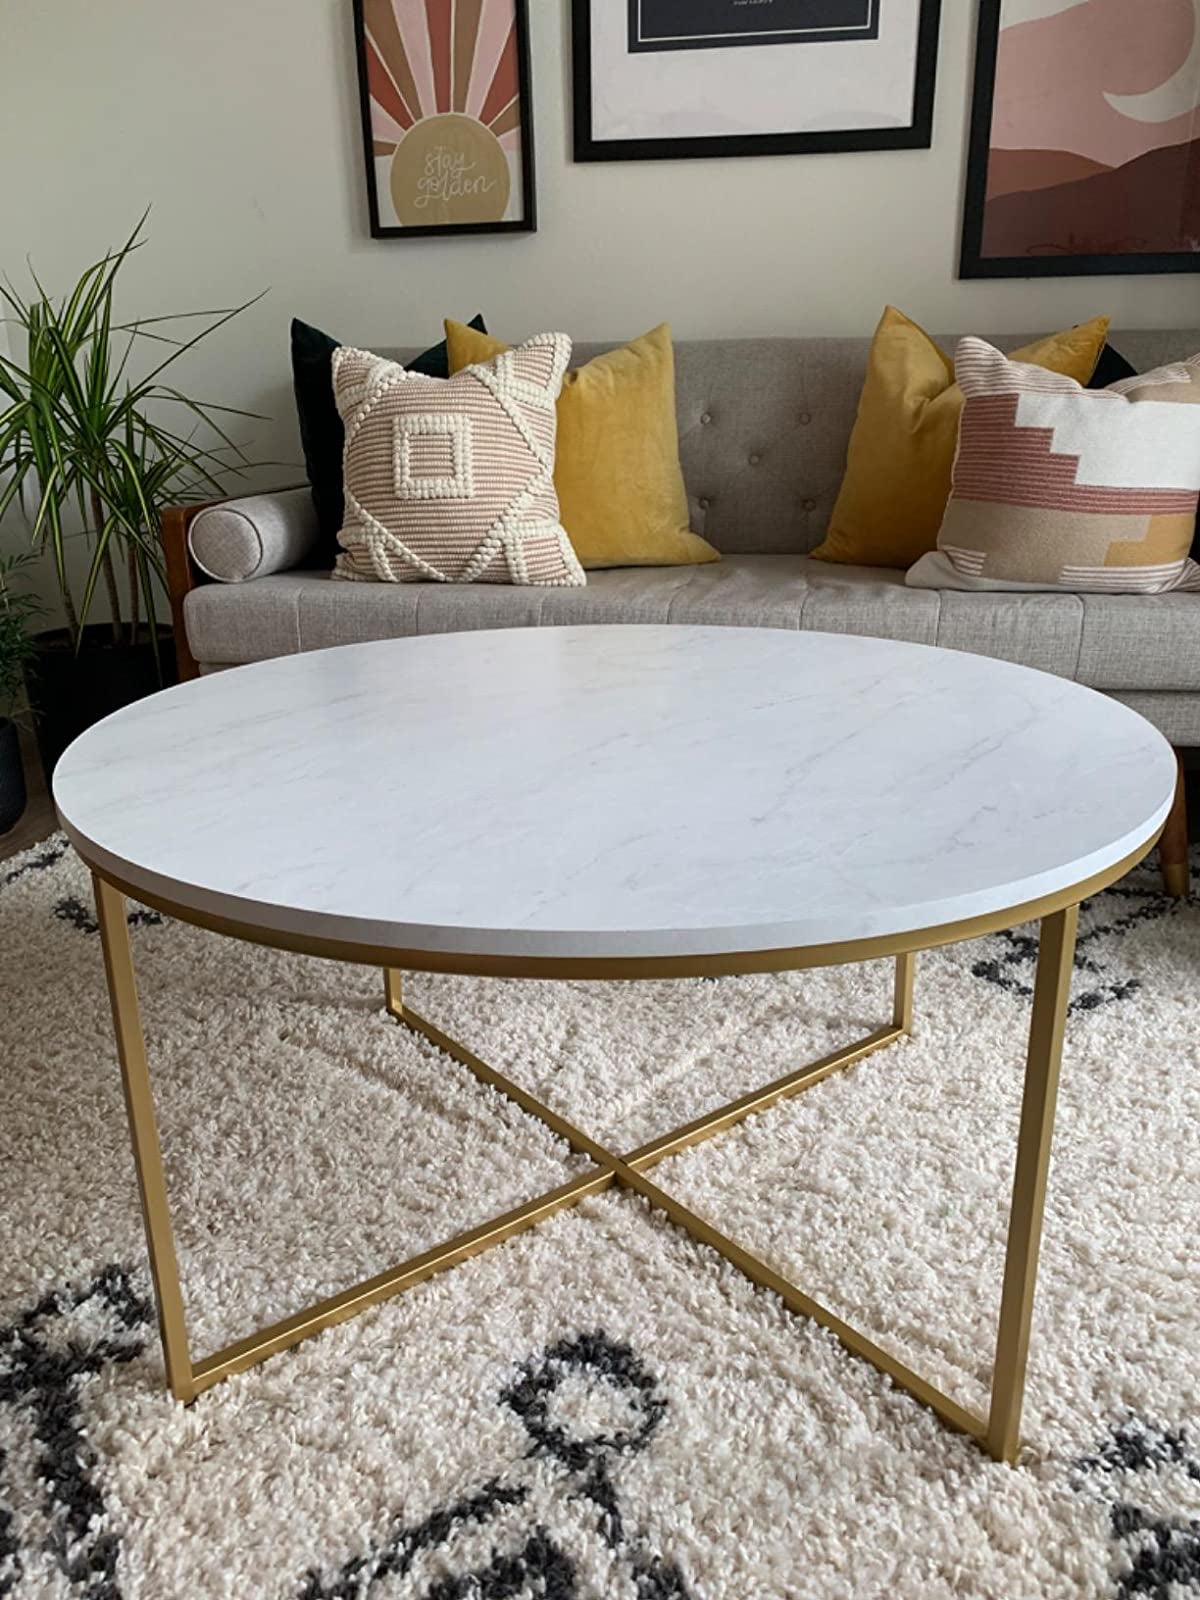 6 chic coffee tables that are perfect for small spaces, starting